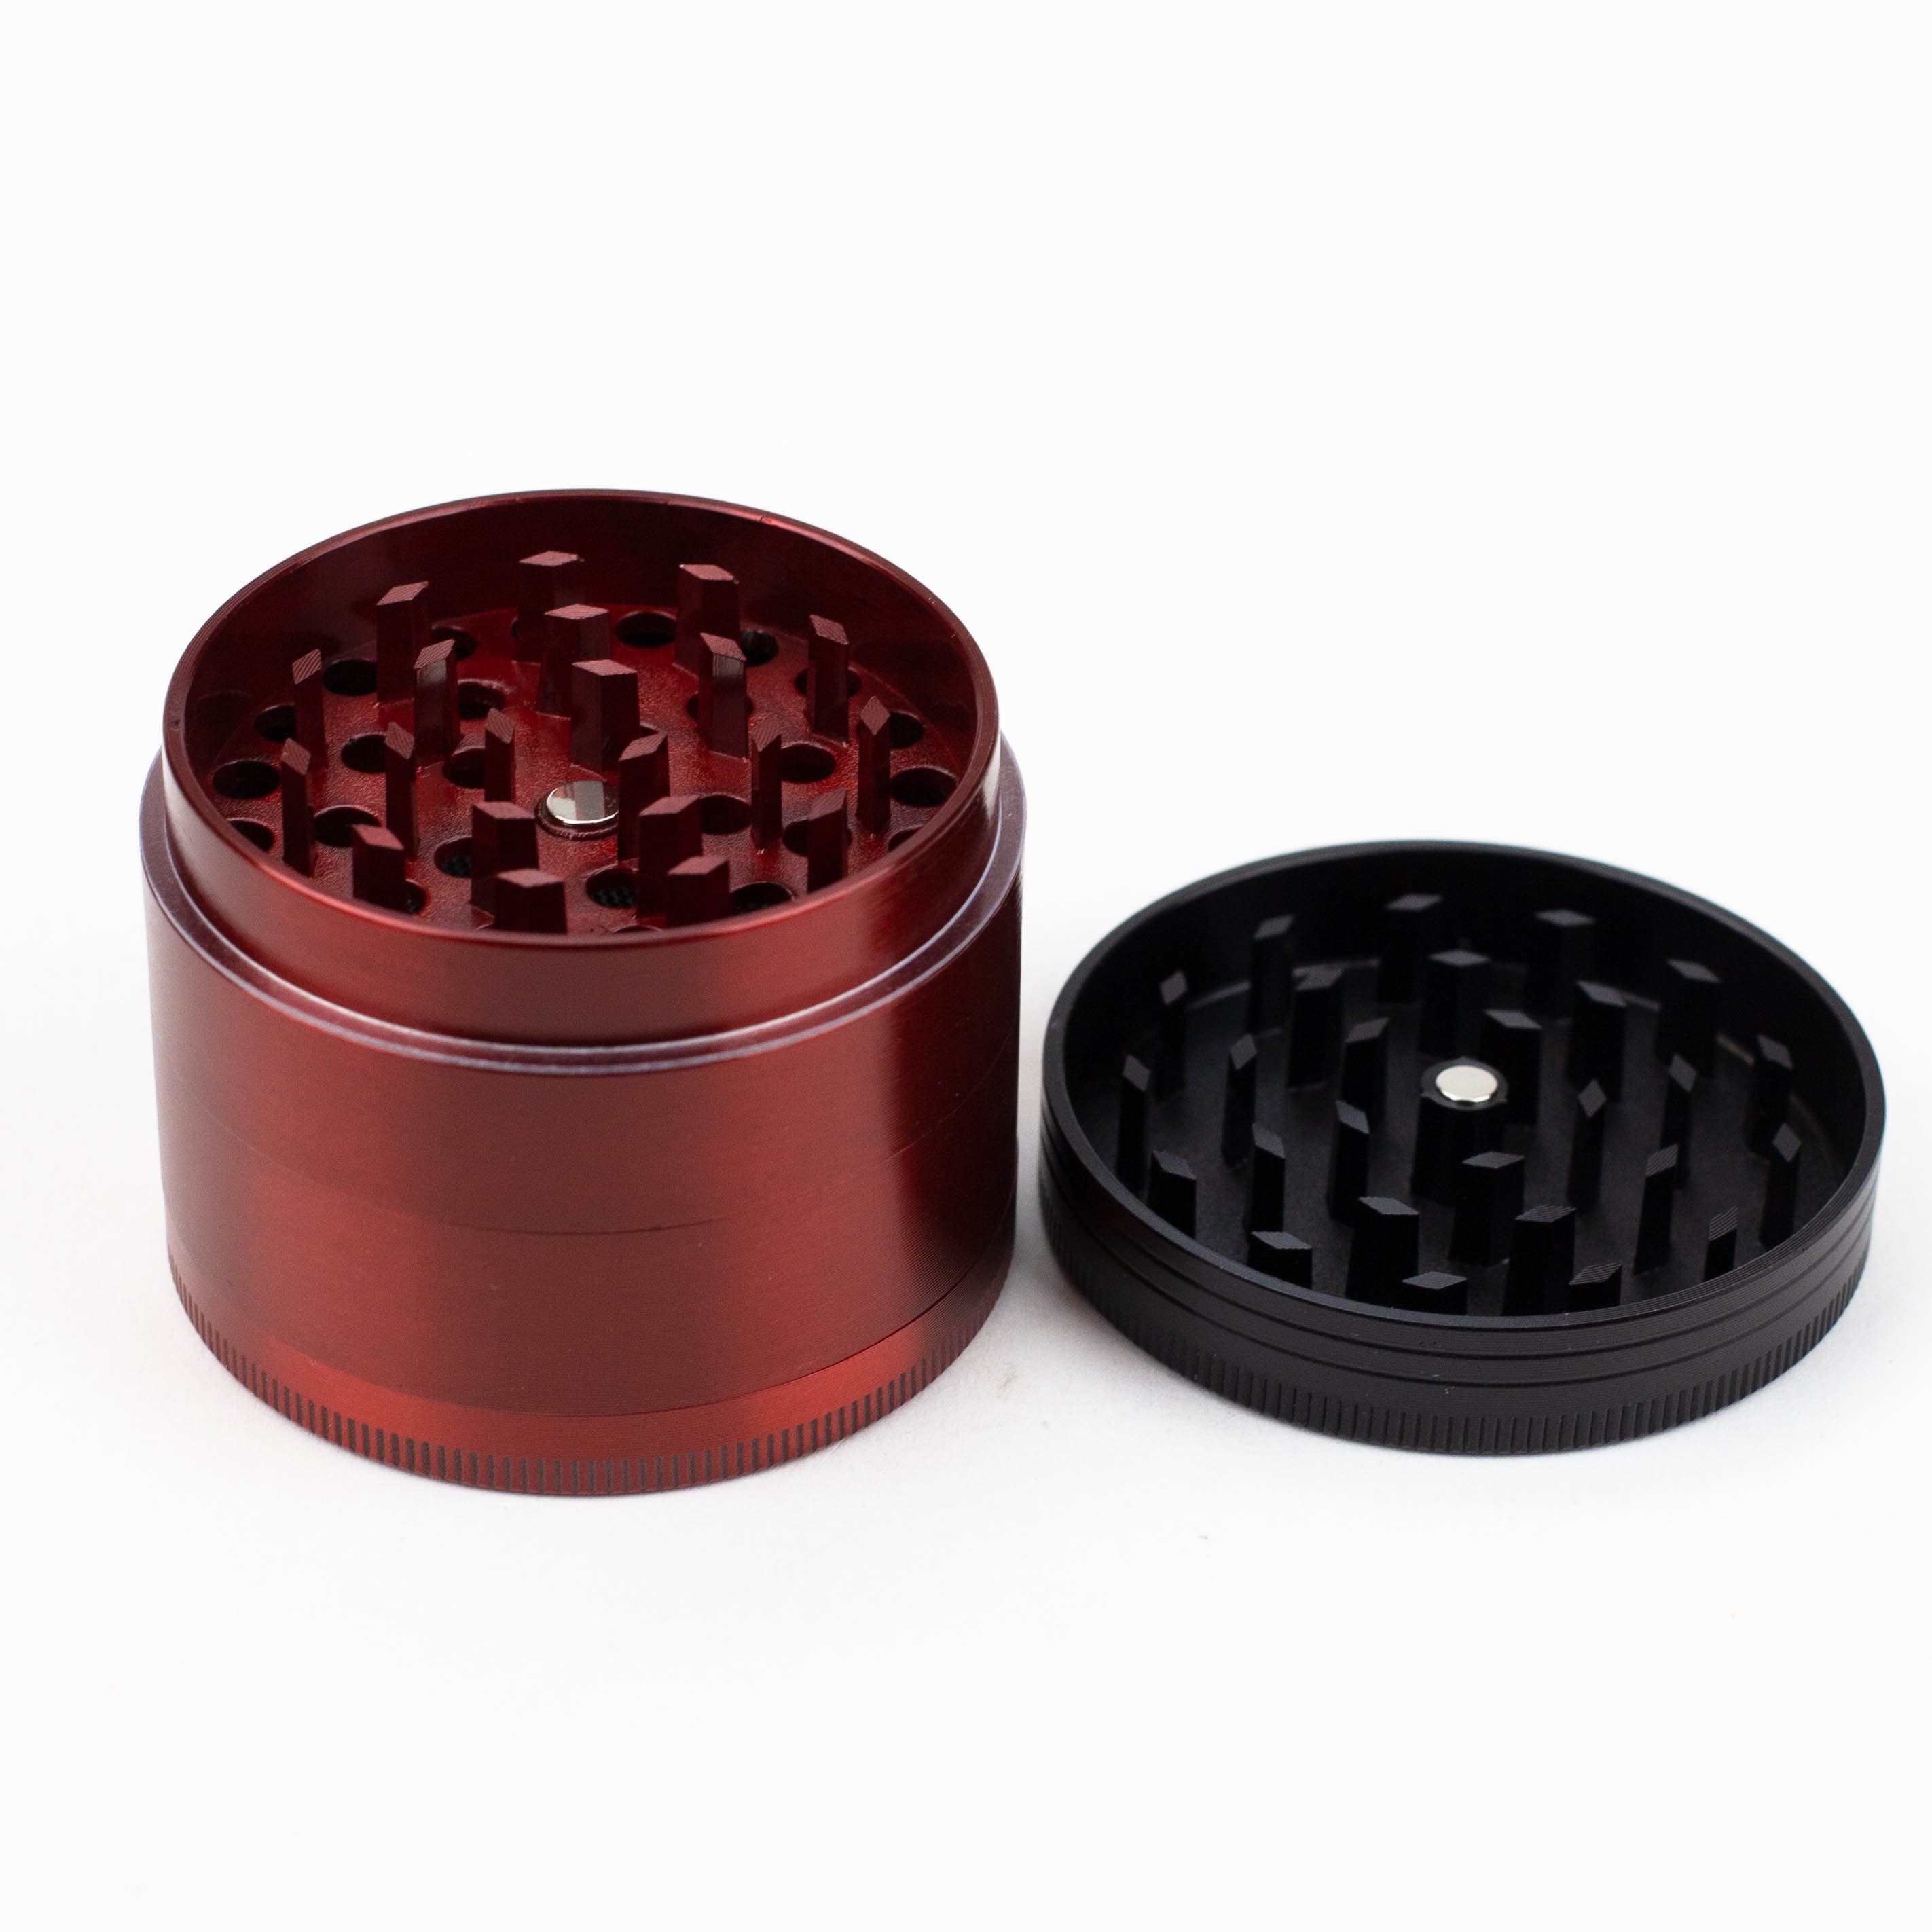 Death row 4 parts metal red grinder by infyniti_4